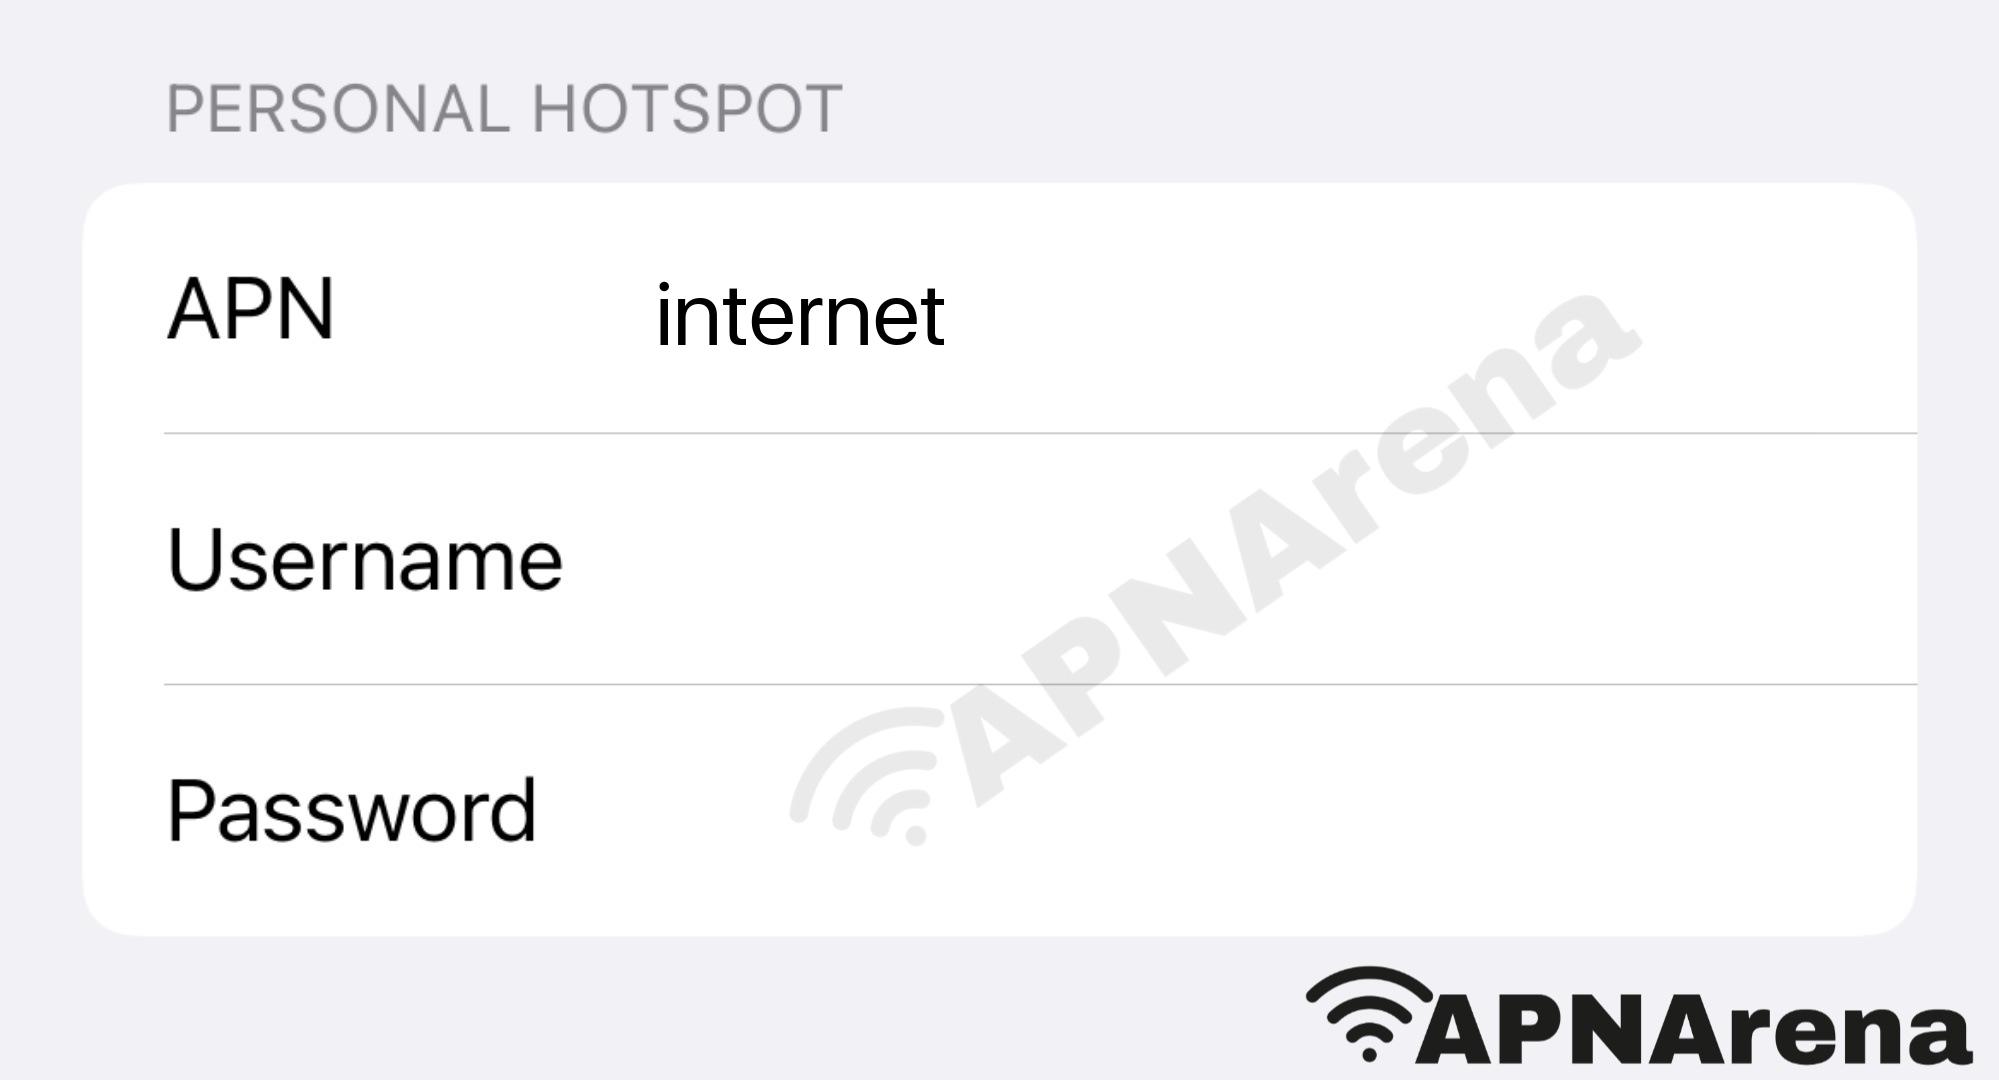 RSPCA Mobile Personal Hotspot Settings for iPhone